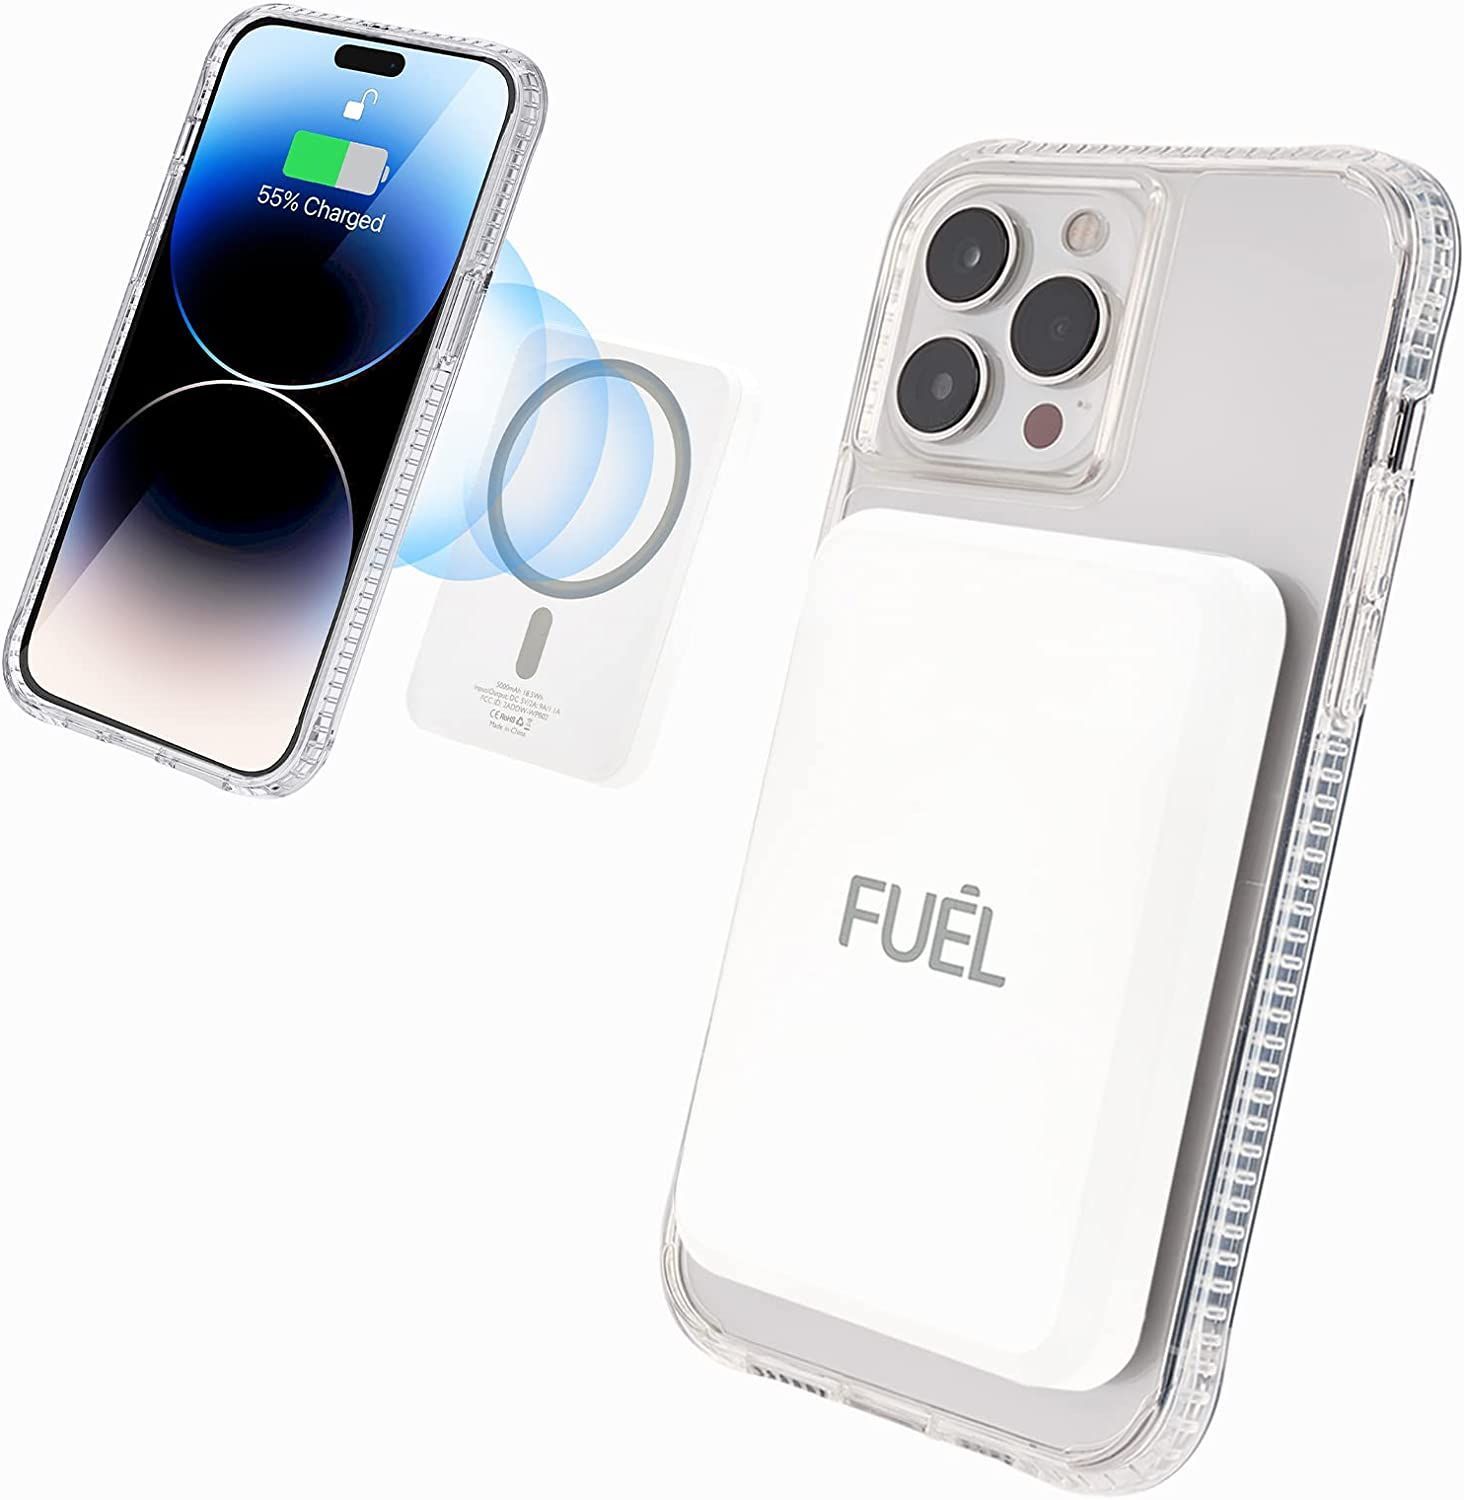 Magnetic Wireless Portable Charger 